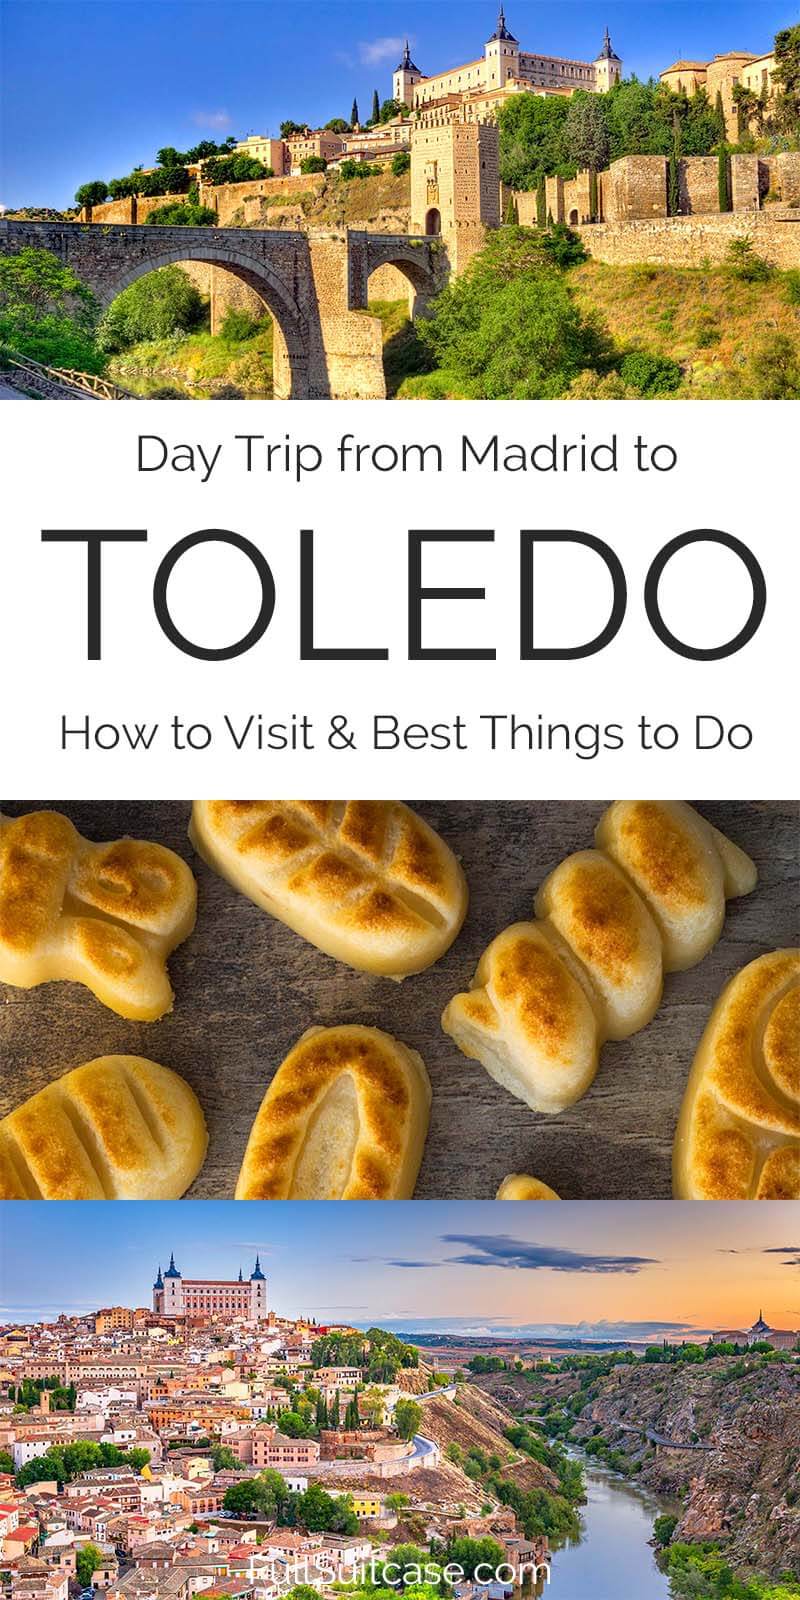 Day trip from Madrid to Toledo (Spain) - how to visit and best things to do